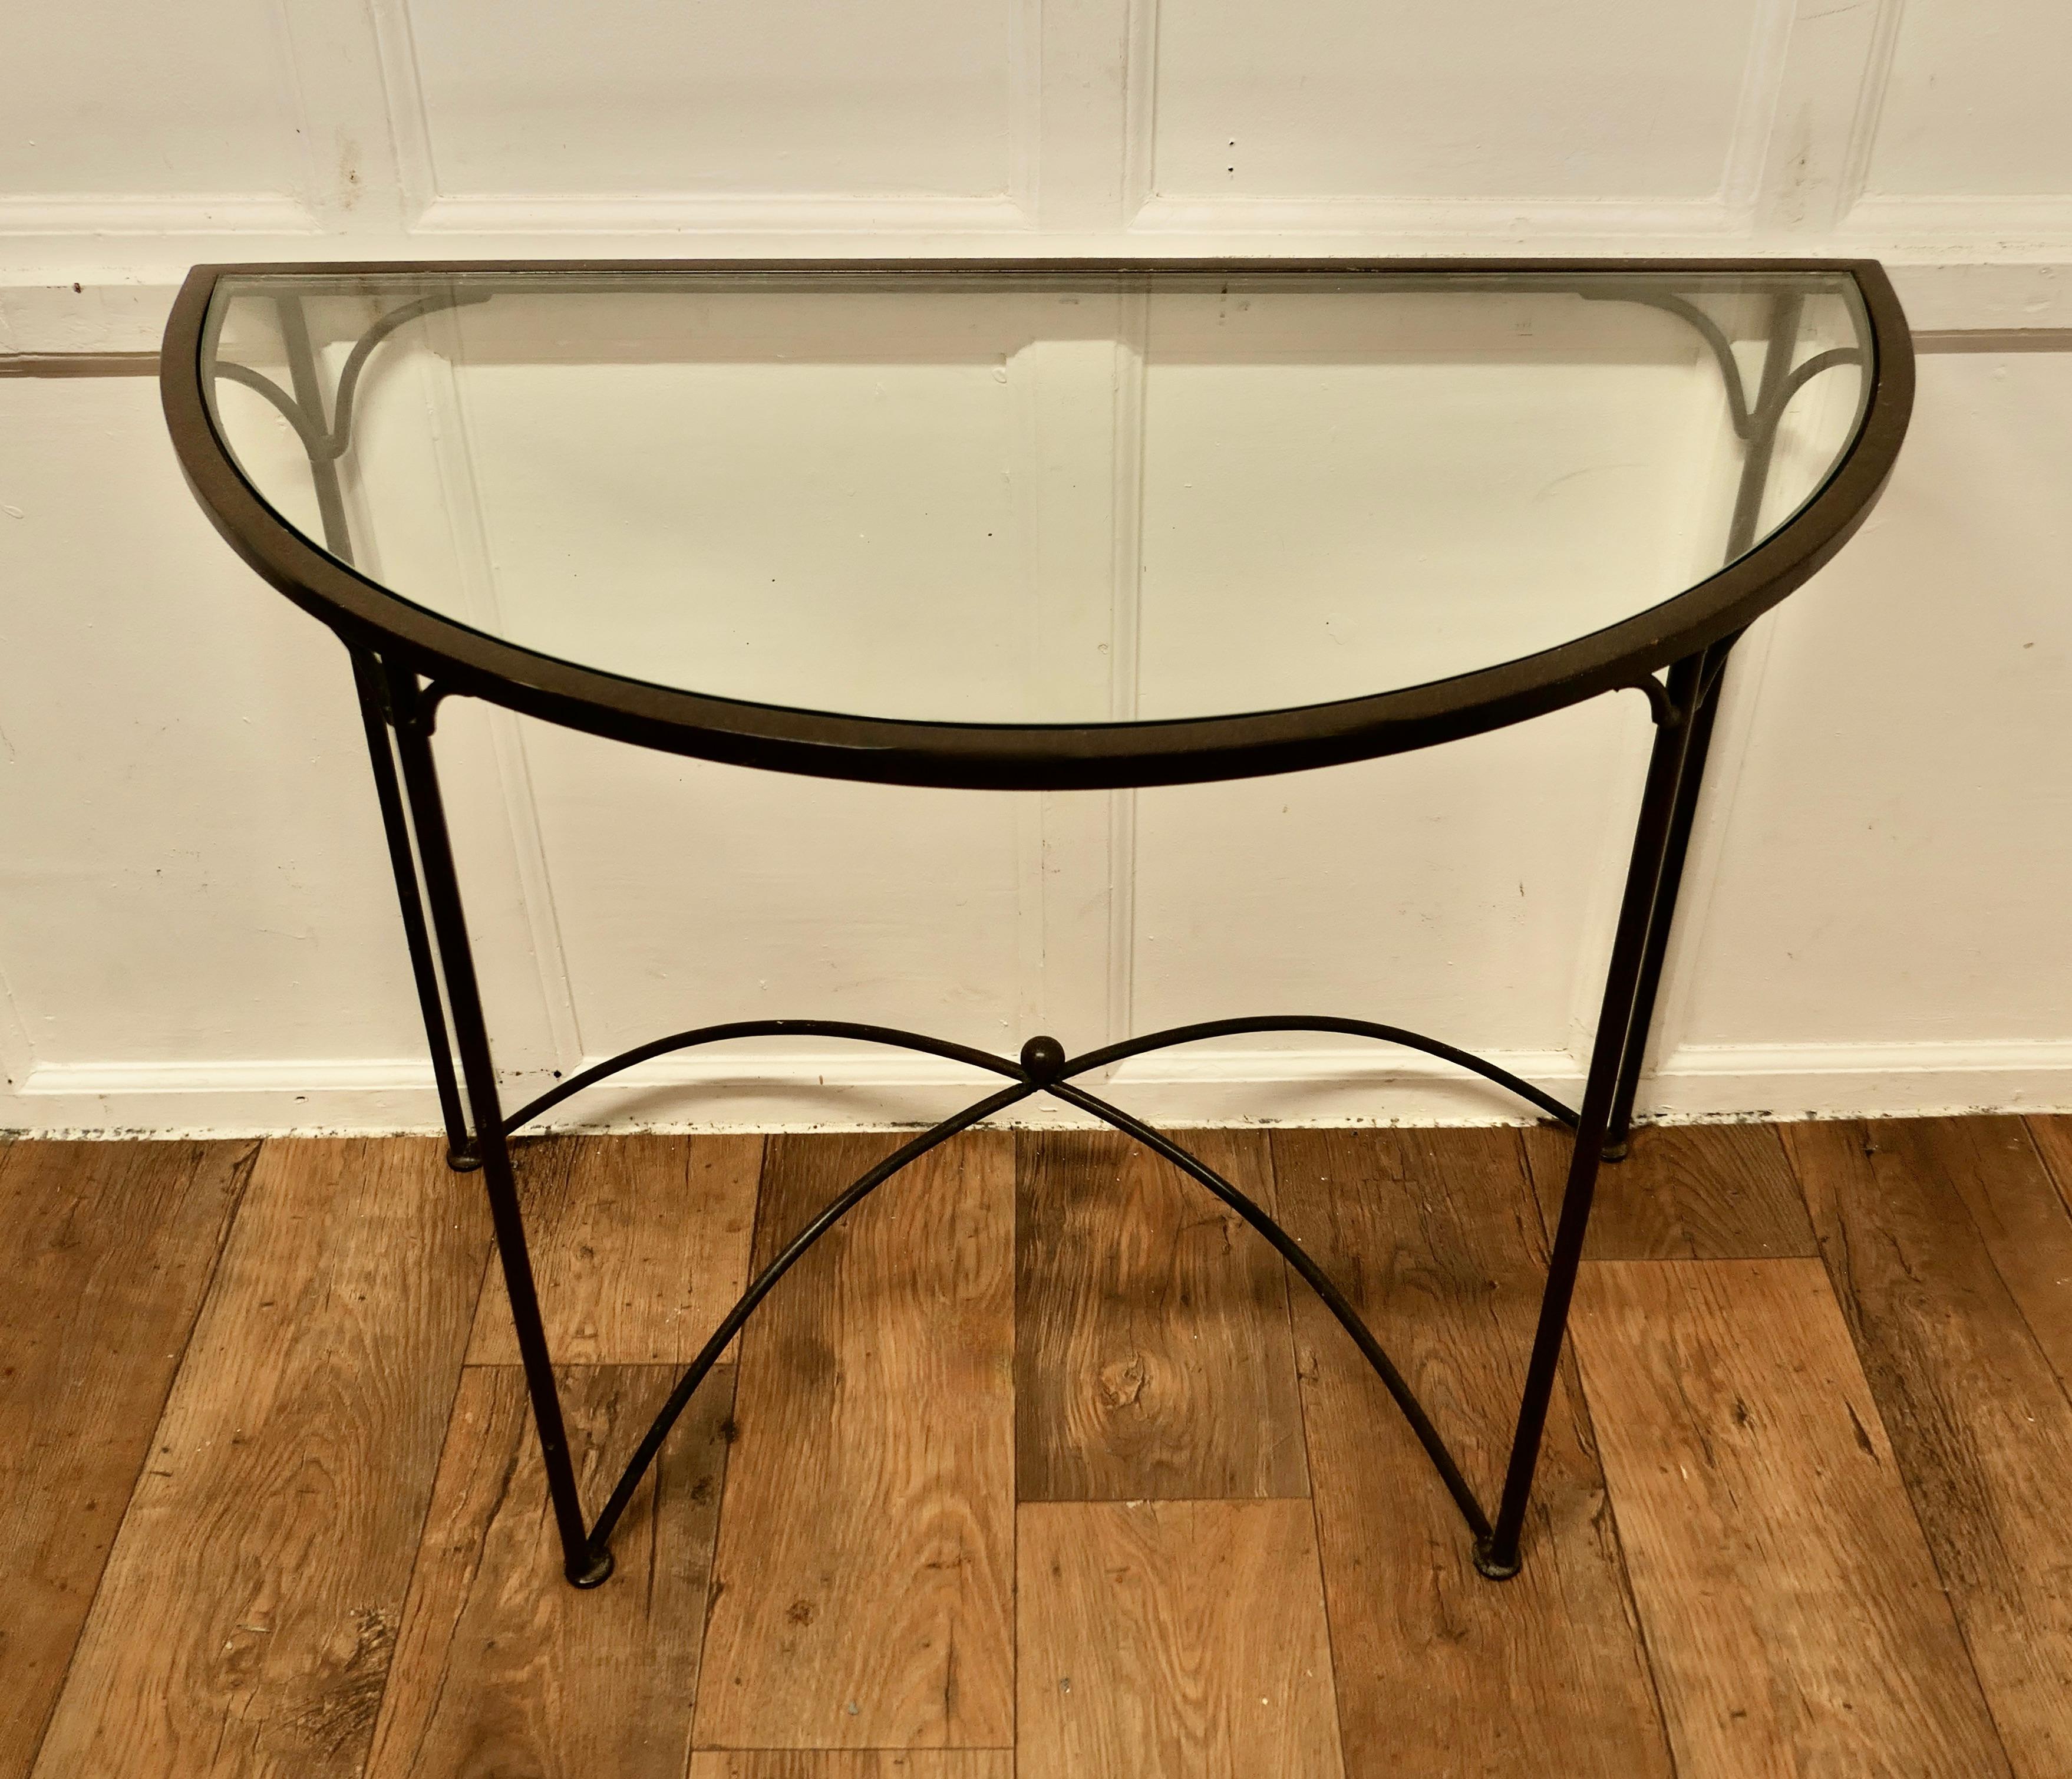 20th Century A Stylish Iron and Glass Console Table    This is a lovely table   For Sale